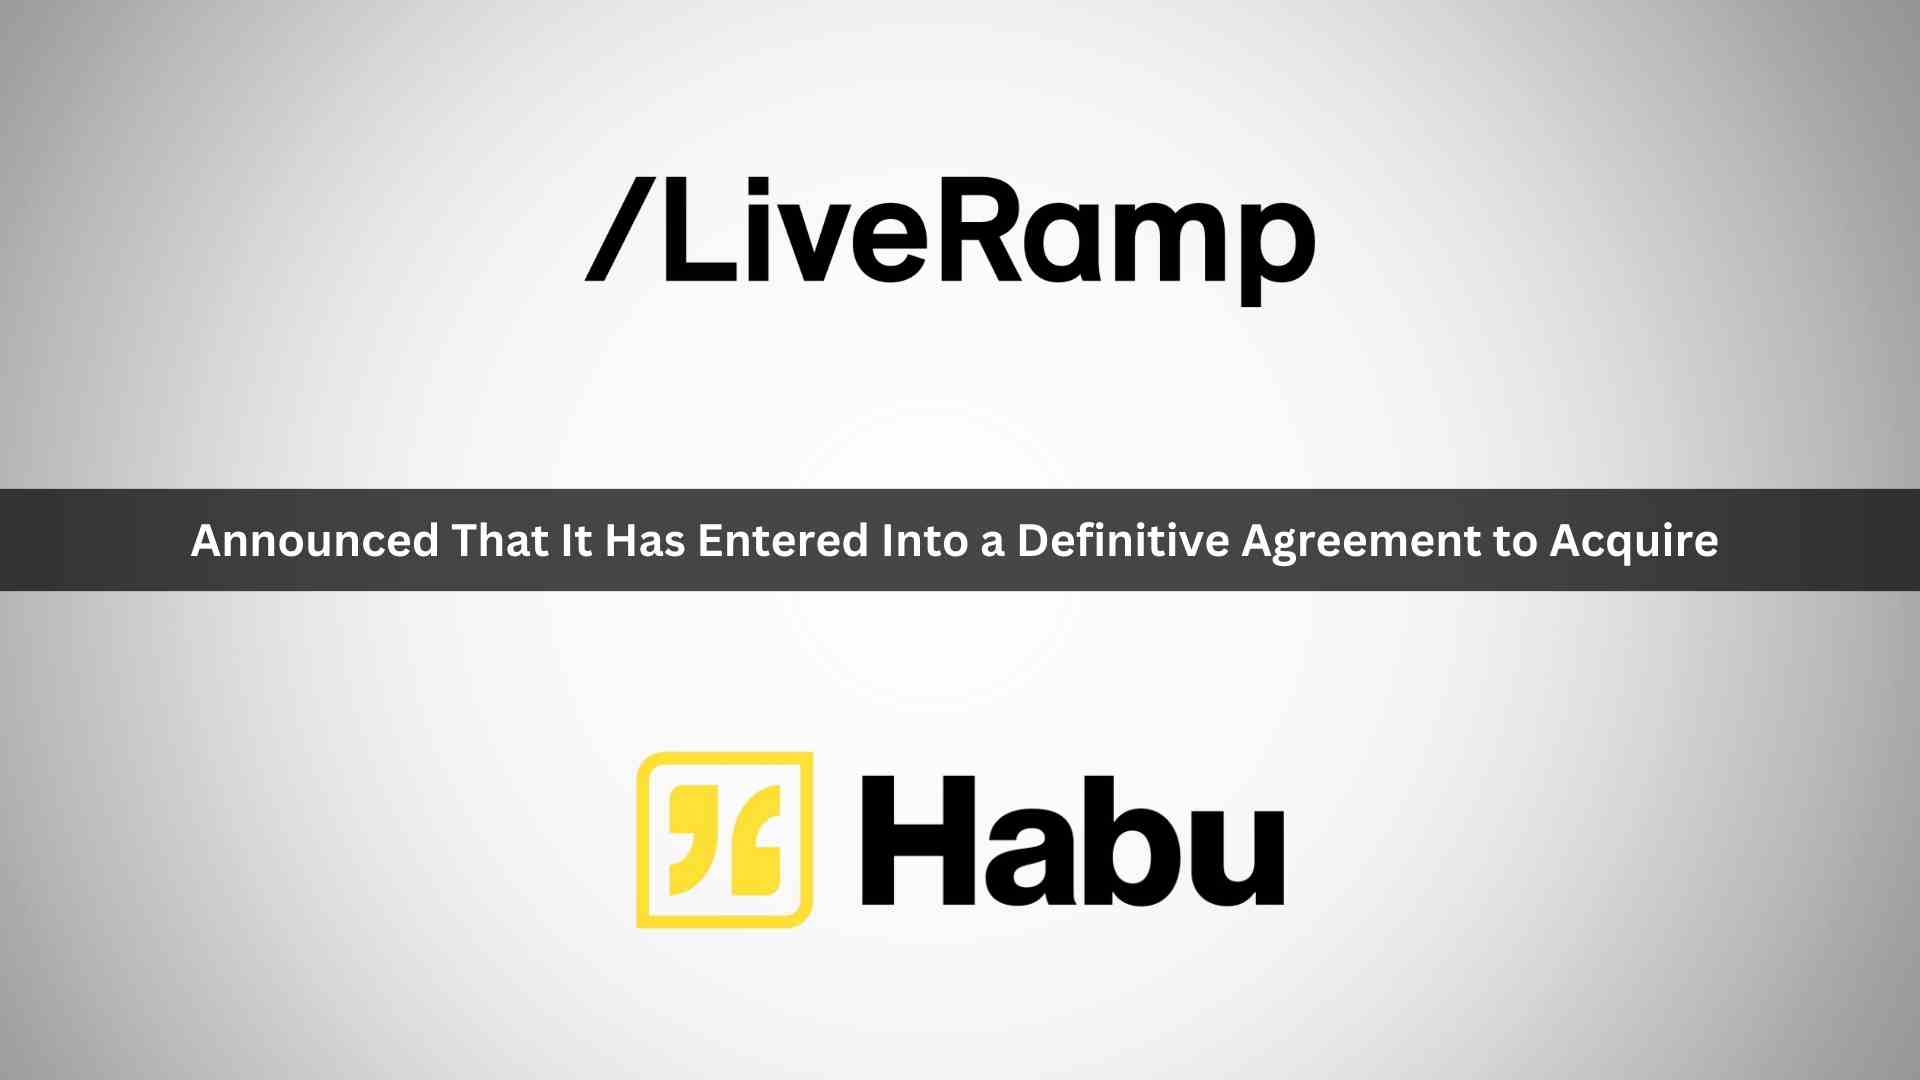 LiveRamp to Acquire Habu to Accelerate the Power of Data Collaboration